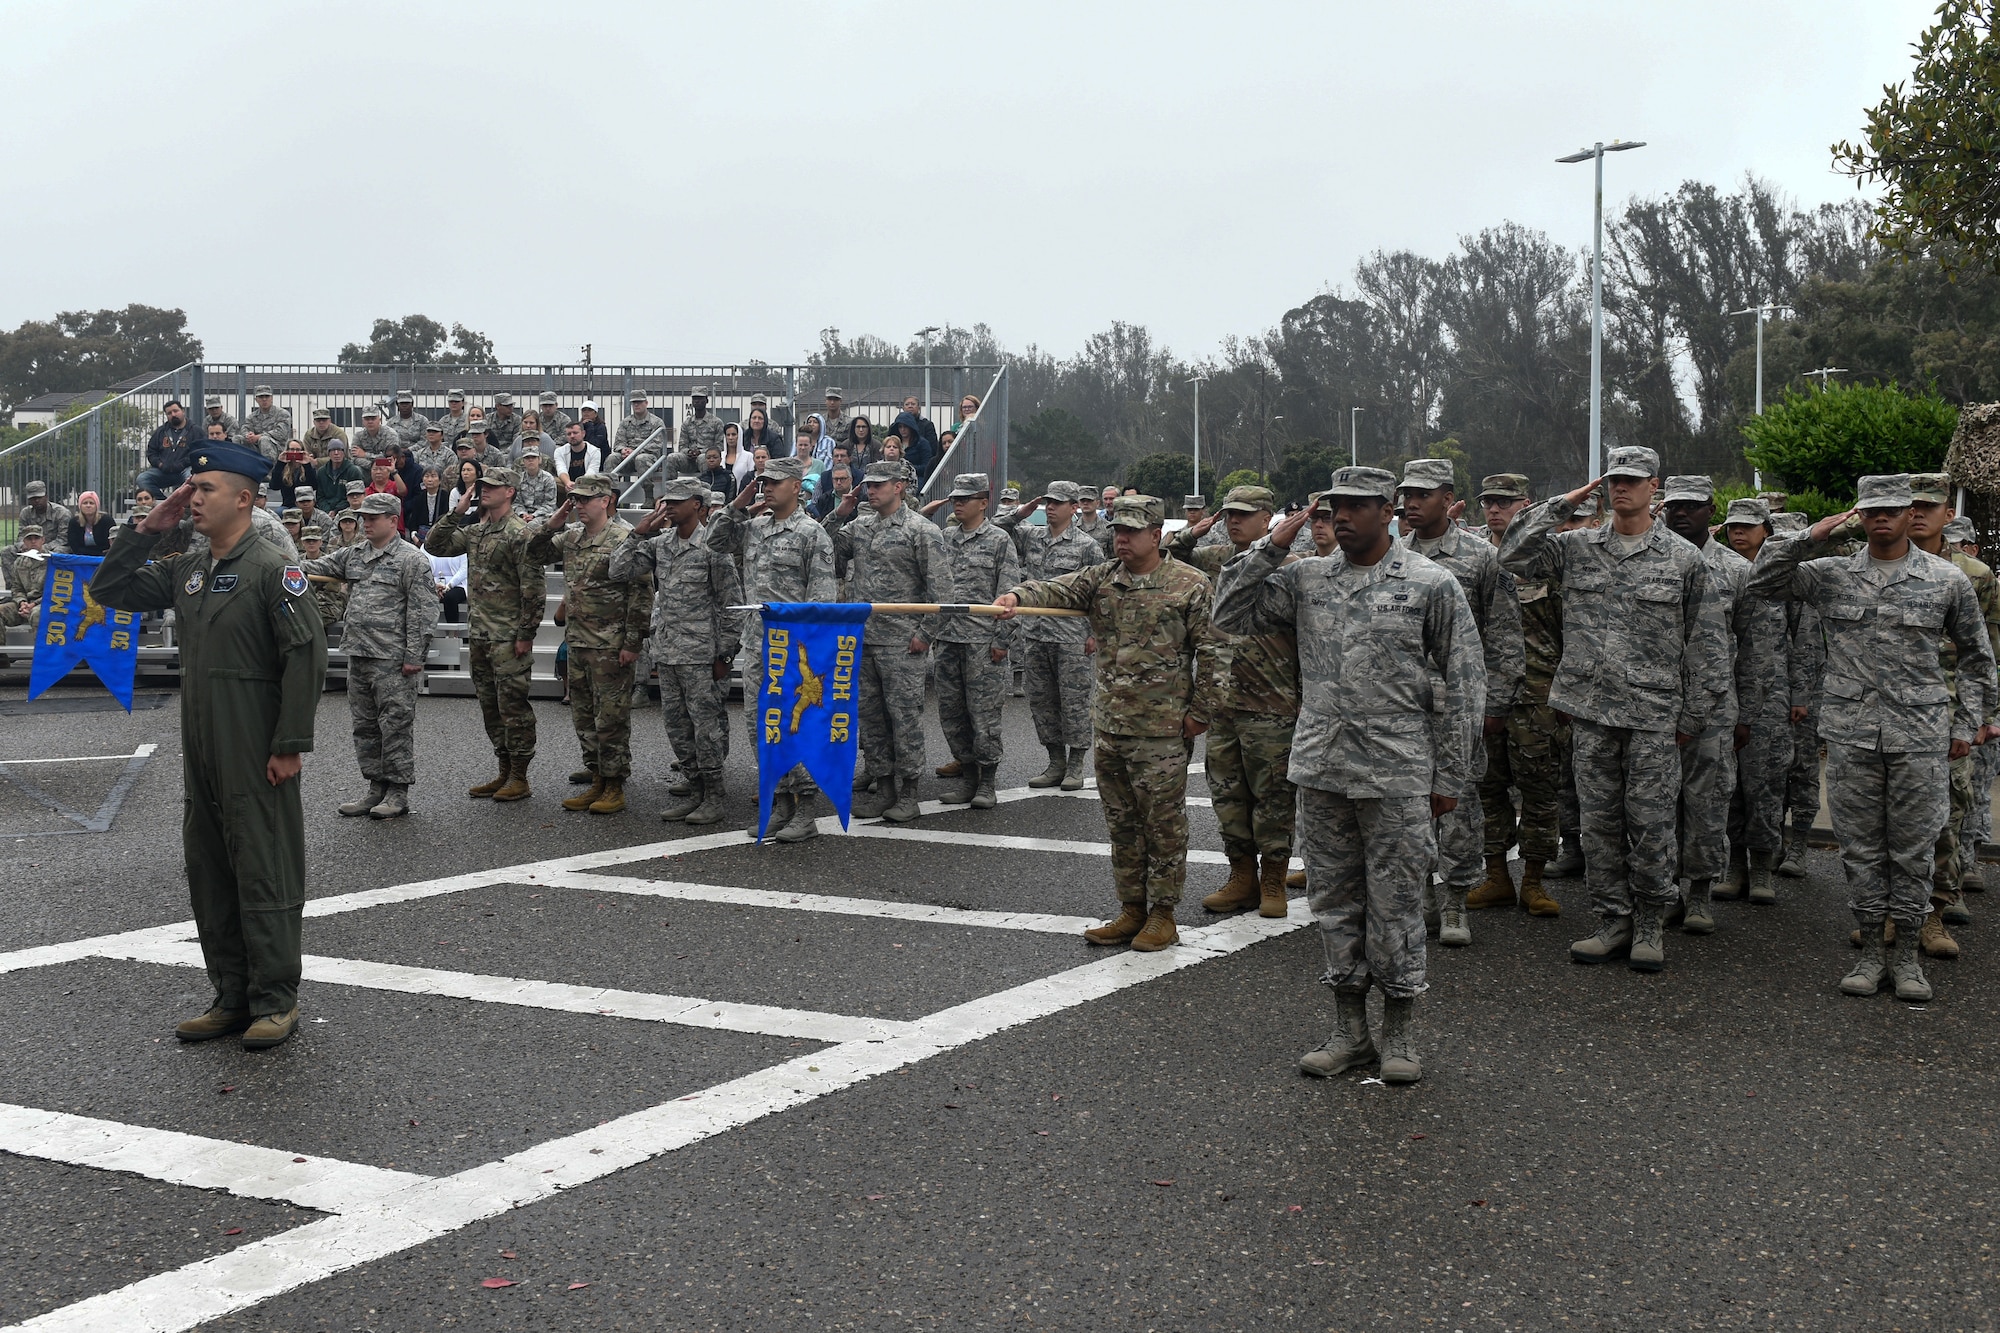 Airmen from the newly activated 30th Health Care Operations Squadron and redesignated 30th Operational Medical Readiness Squadron provide a presentation of the group during the 30th Medical Group reorganization ceremony Aug. 23, 2019, at Vandenberg Air Force Base, Calif.